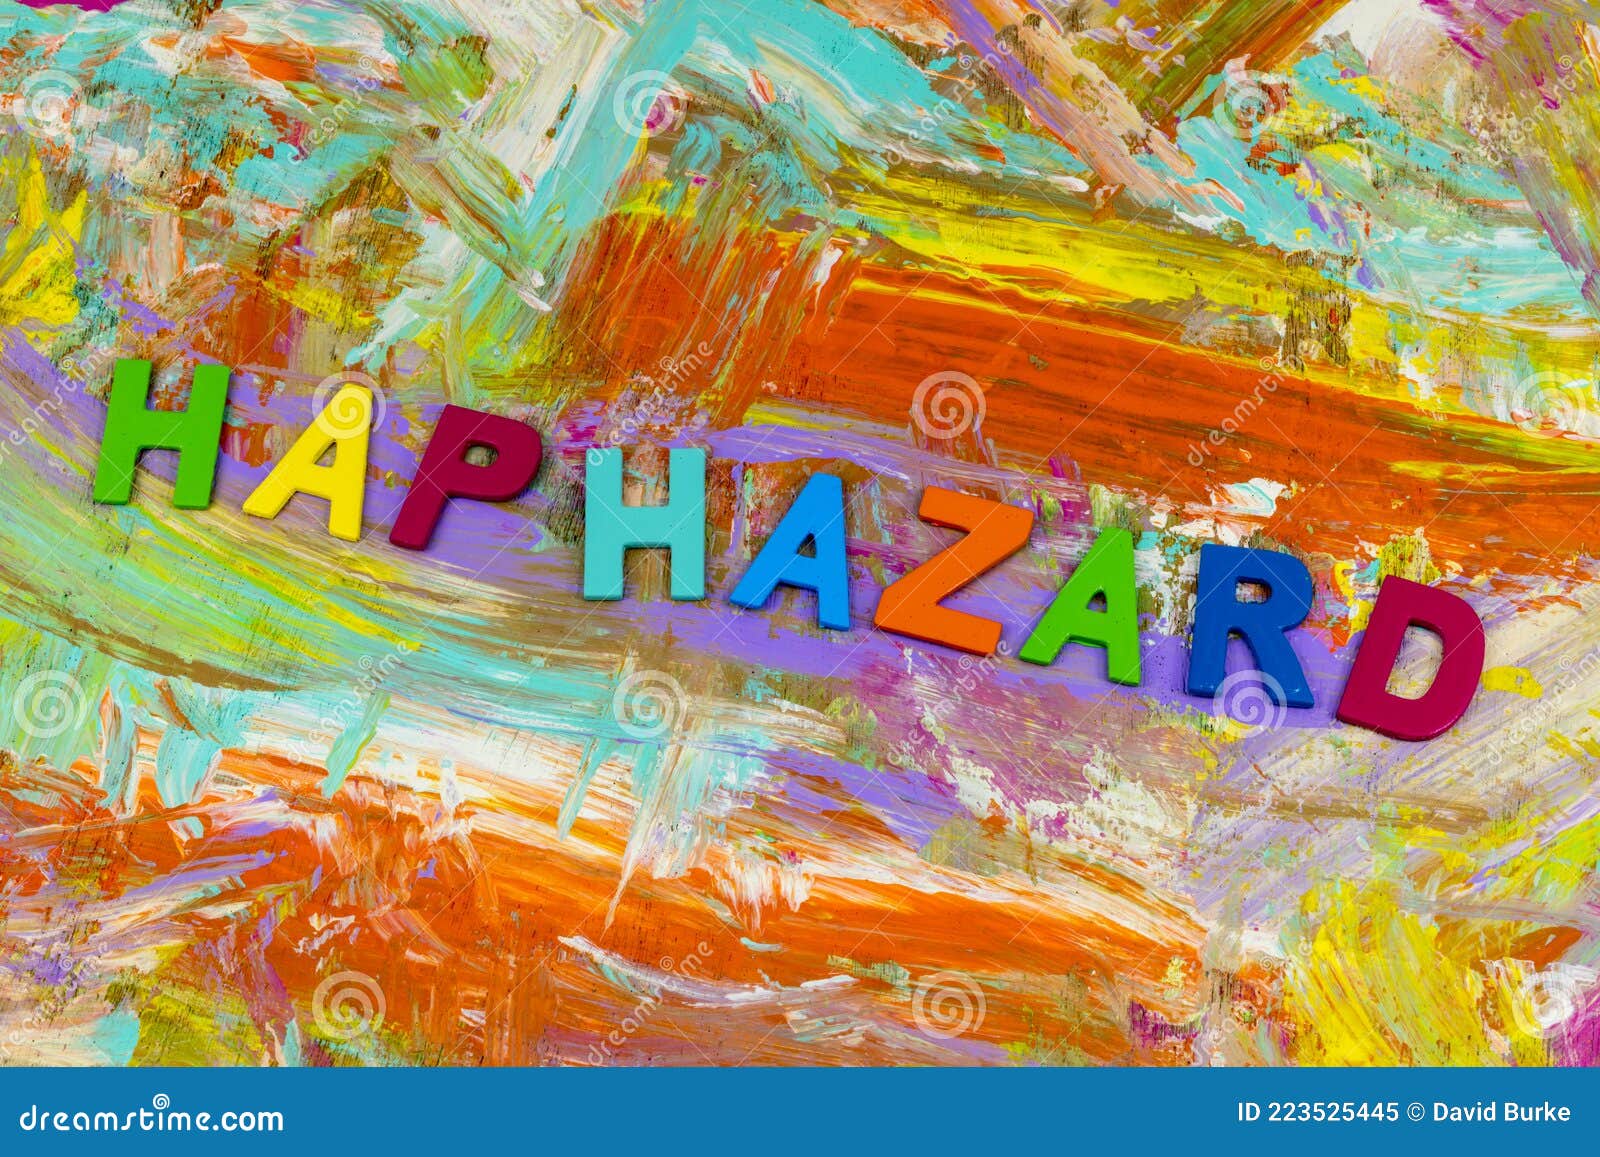 haphazard background texture scattered disorder unplanned indiscriminate confused disorganized